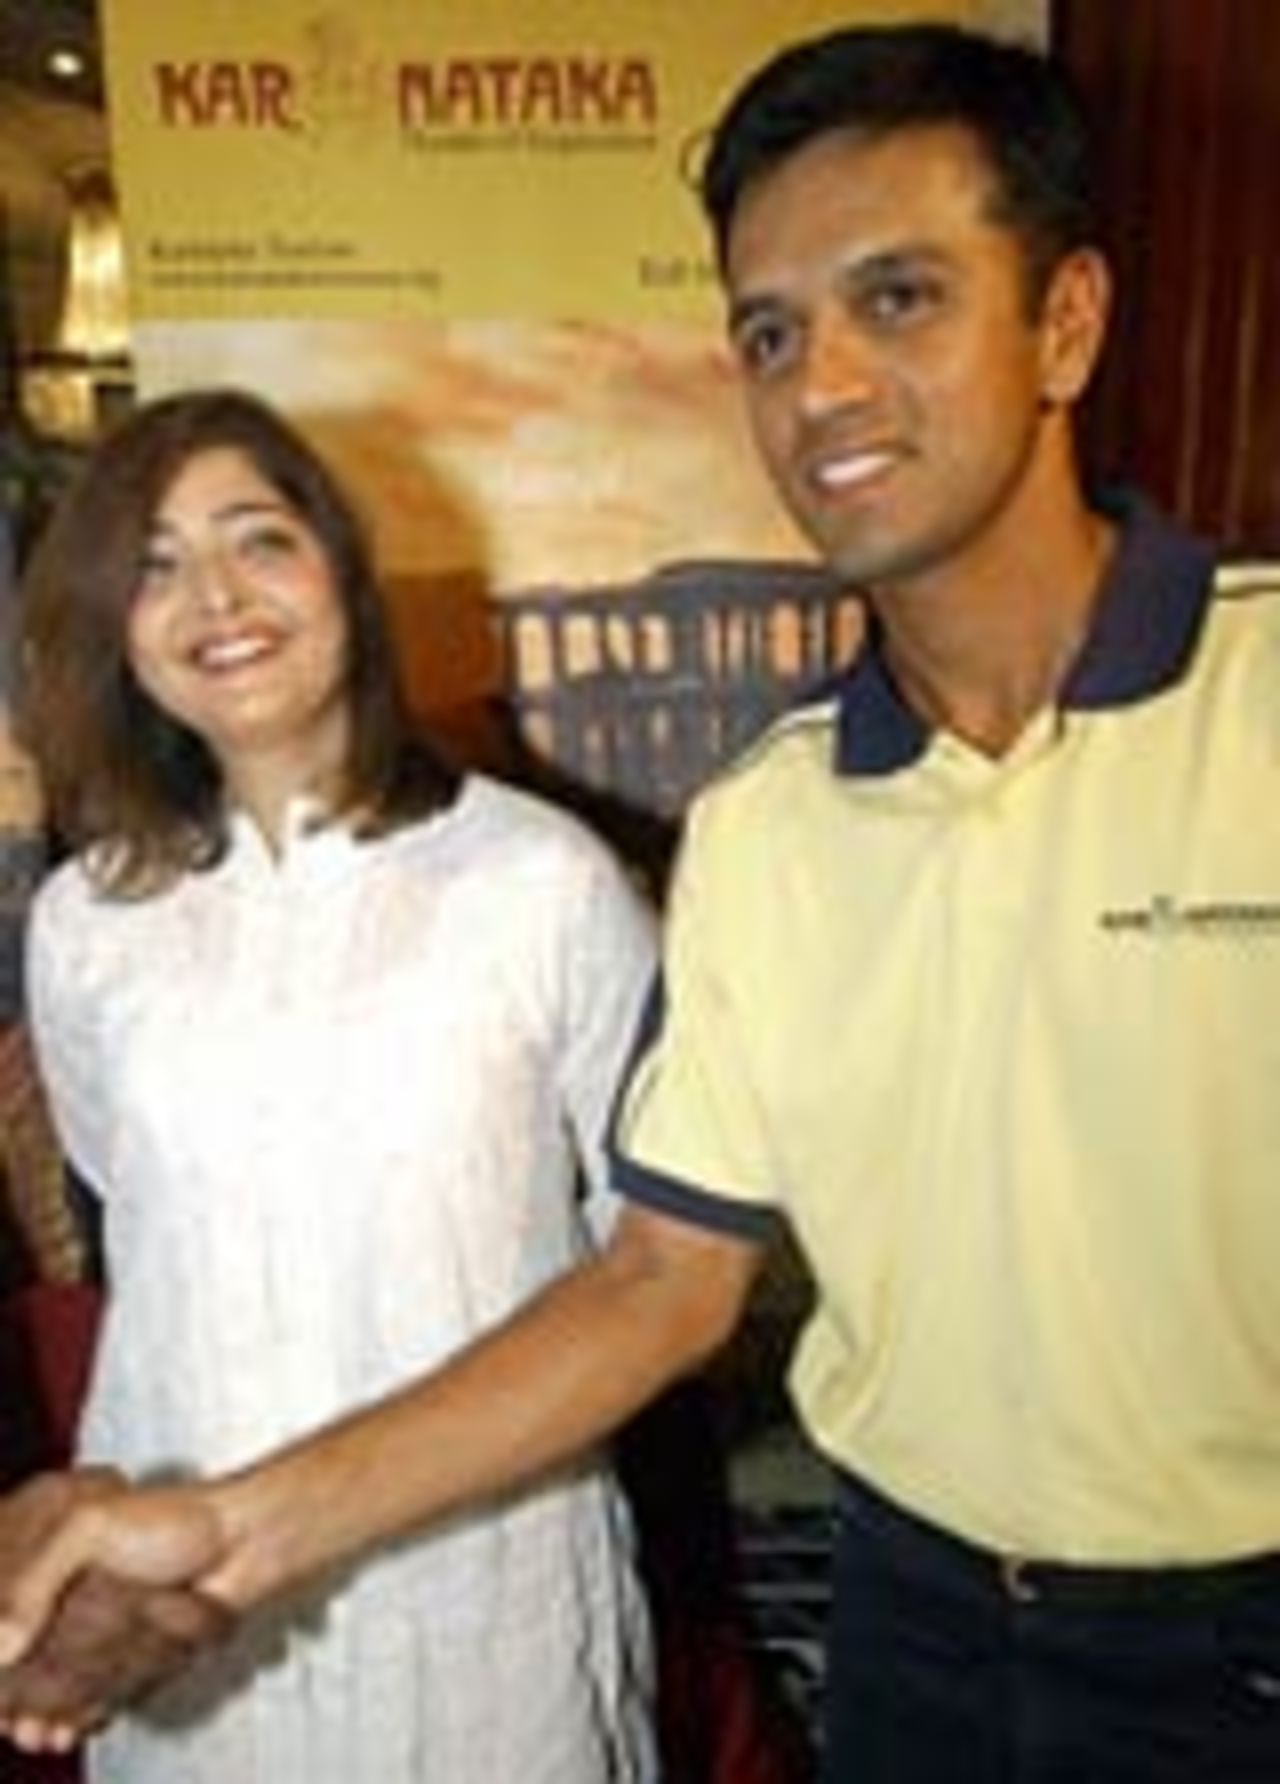 Rahul Dravid is greeted by singer and actress Vasundhara Das after they were endorsed by Karnataka Tourism as brand ambassadors, Bangalore, February 24, 2004